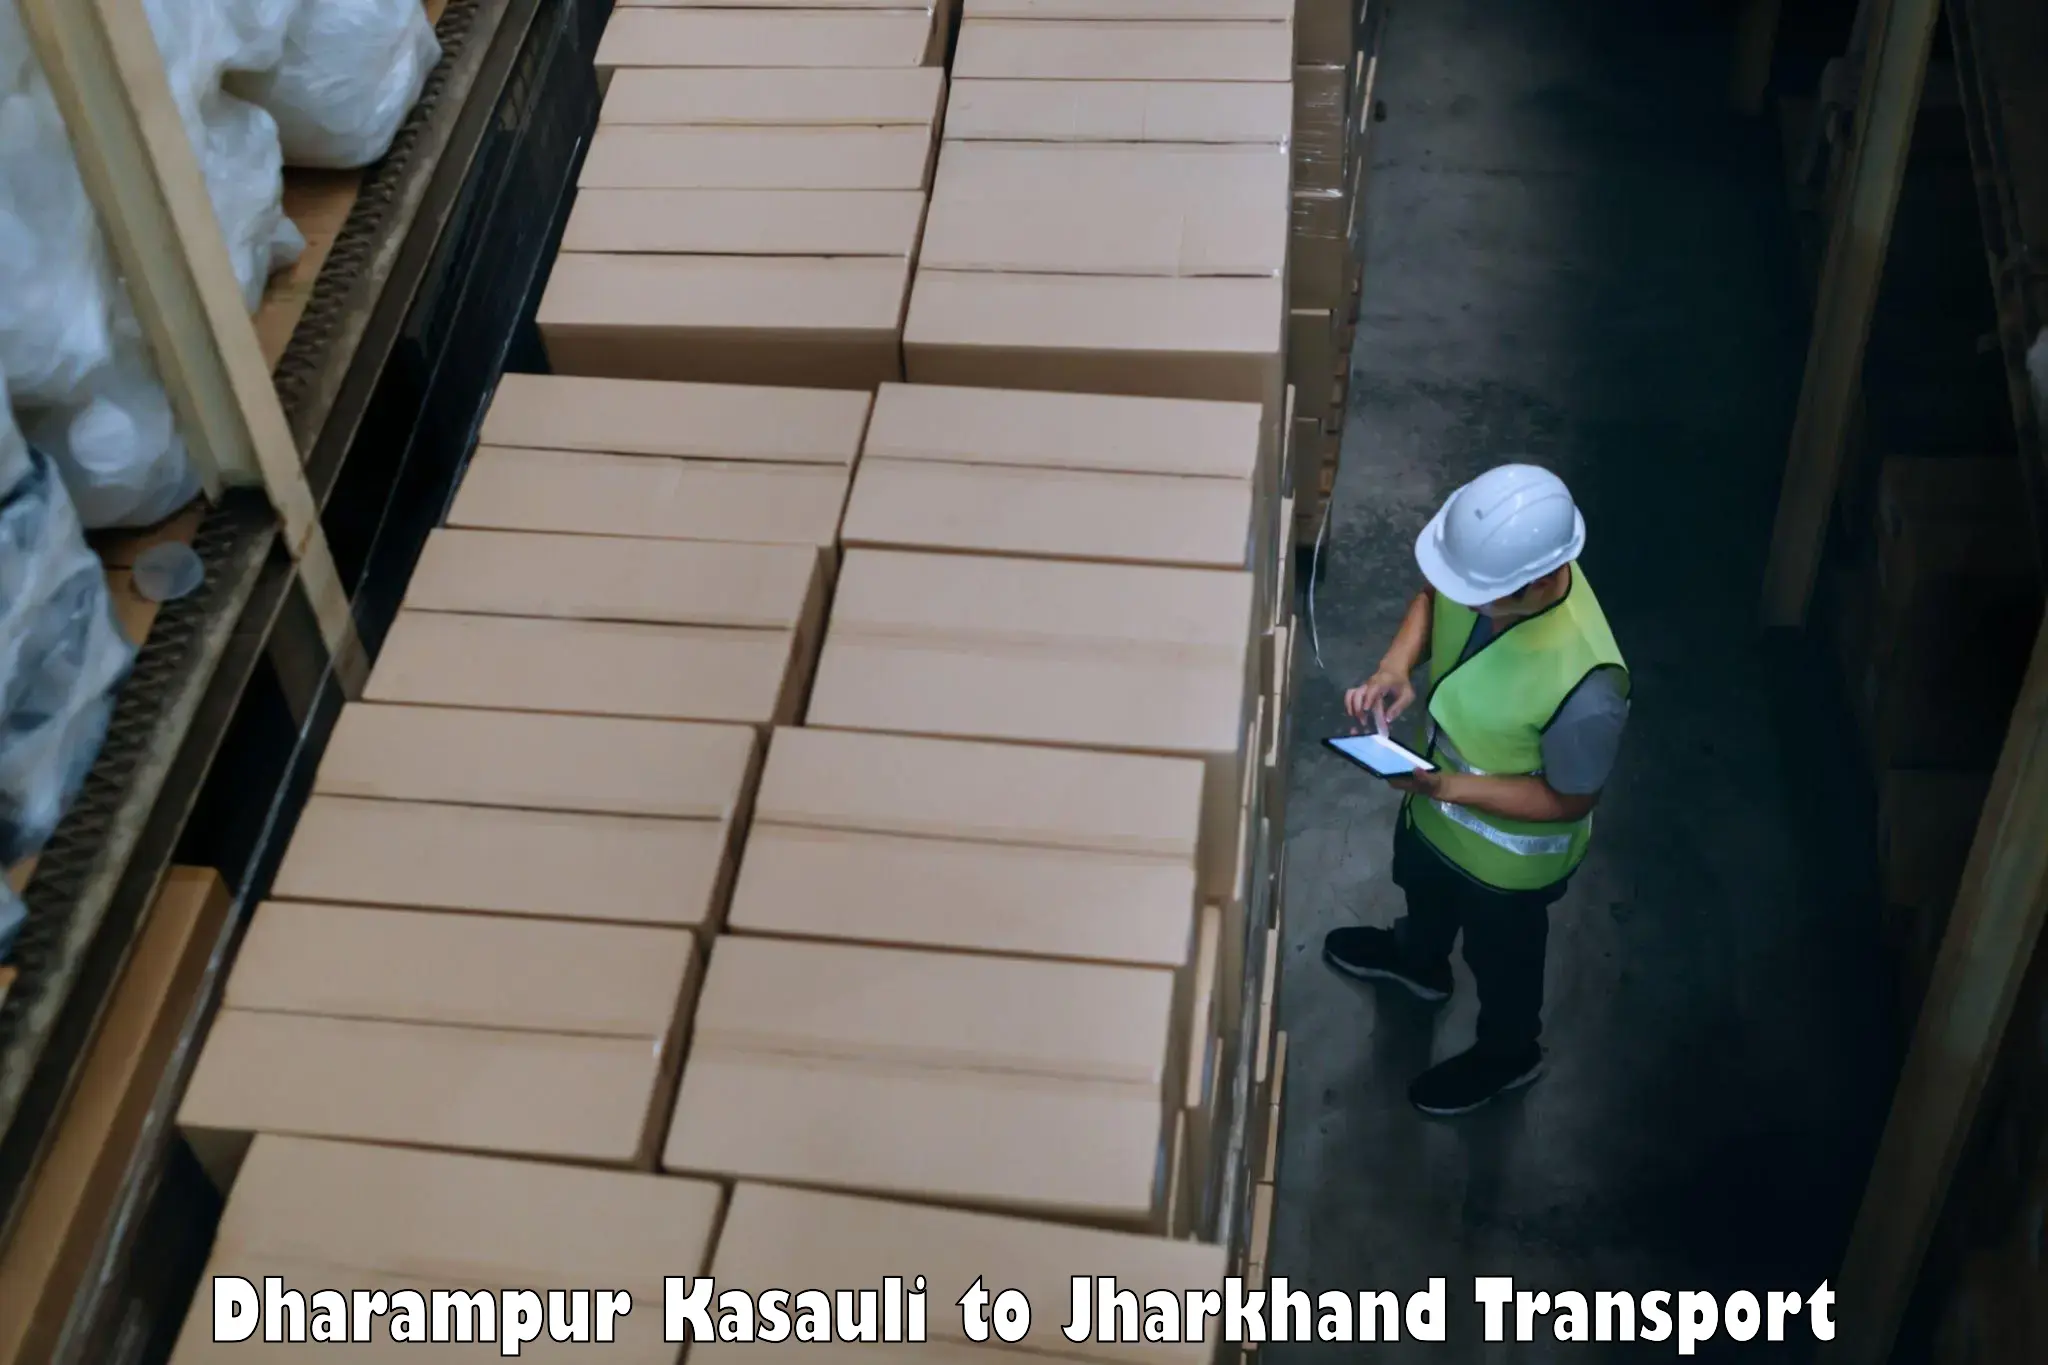 Air freight transport services Dharampur Kasauli to Jamshedpur